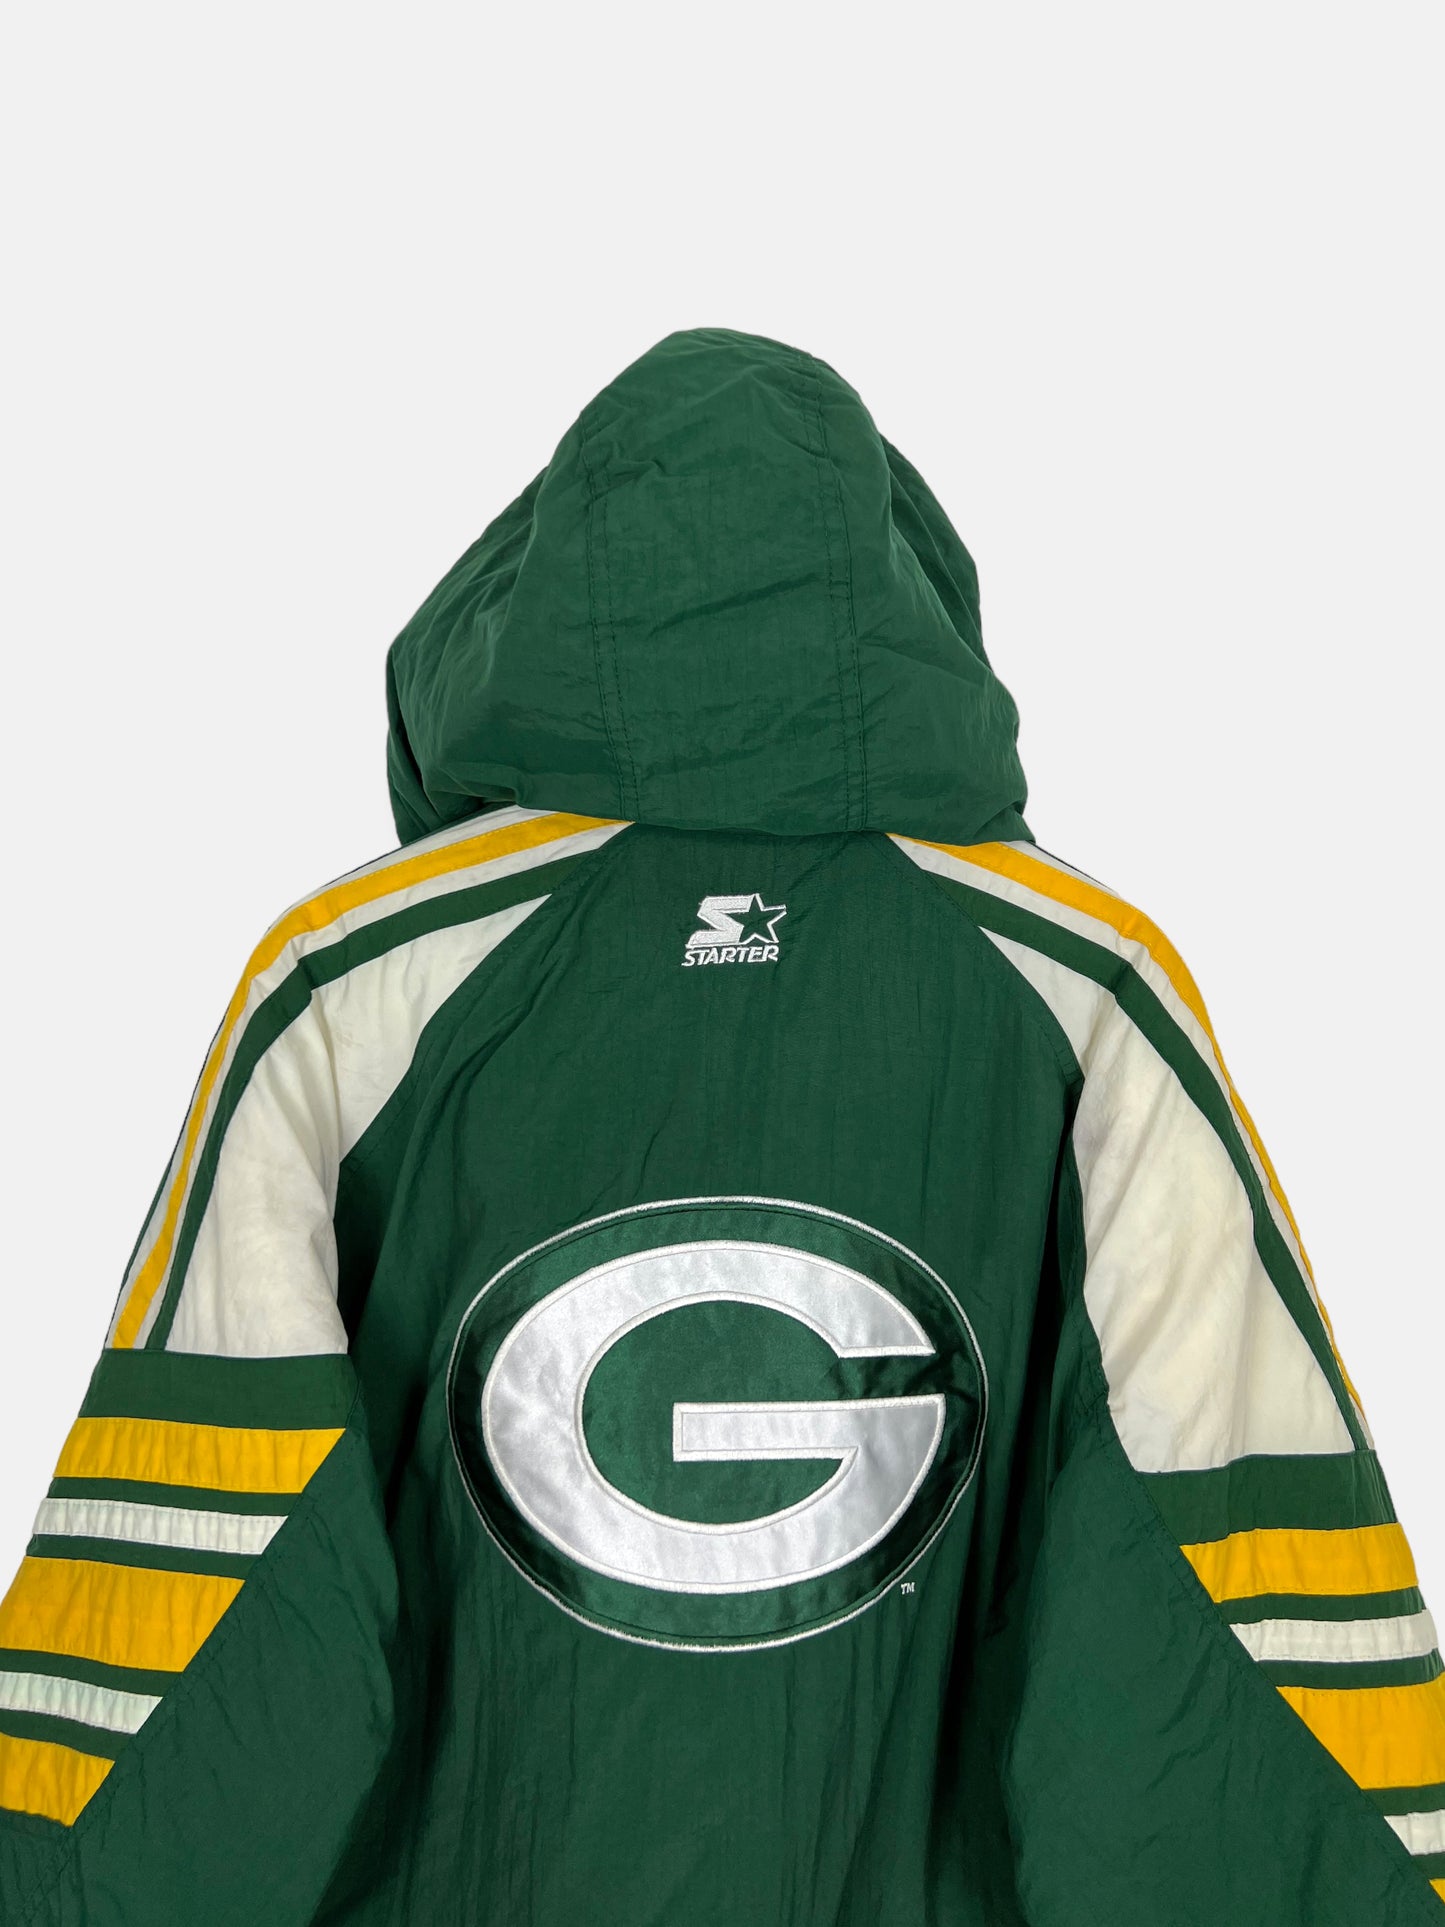 90's Green Bay Packers Starter NFL Embroidered Puffer Jacket Size XL